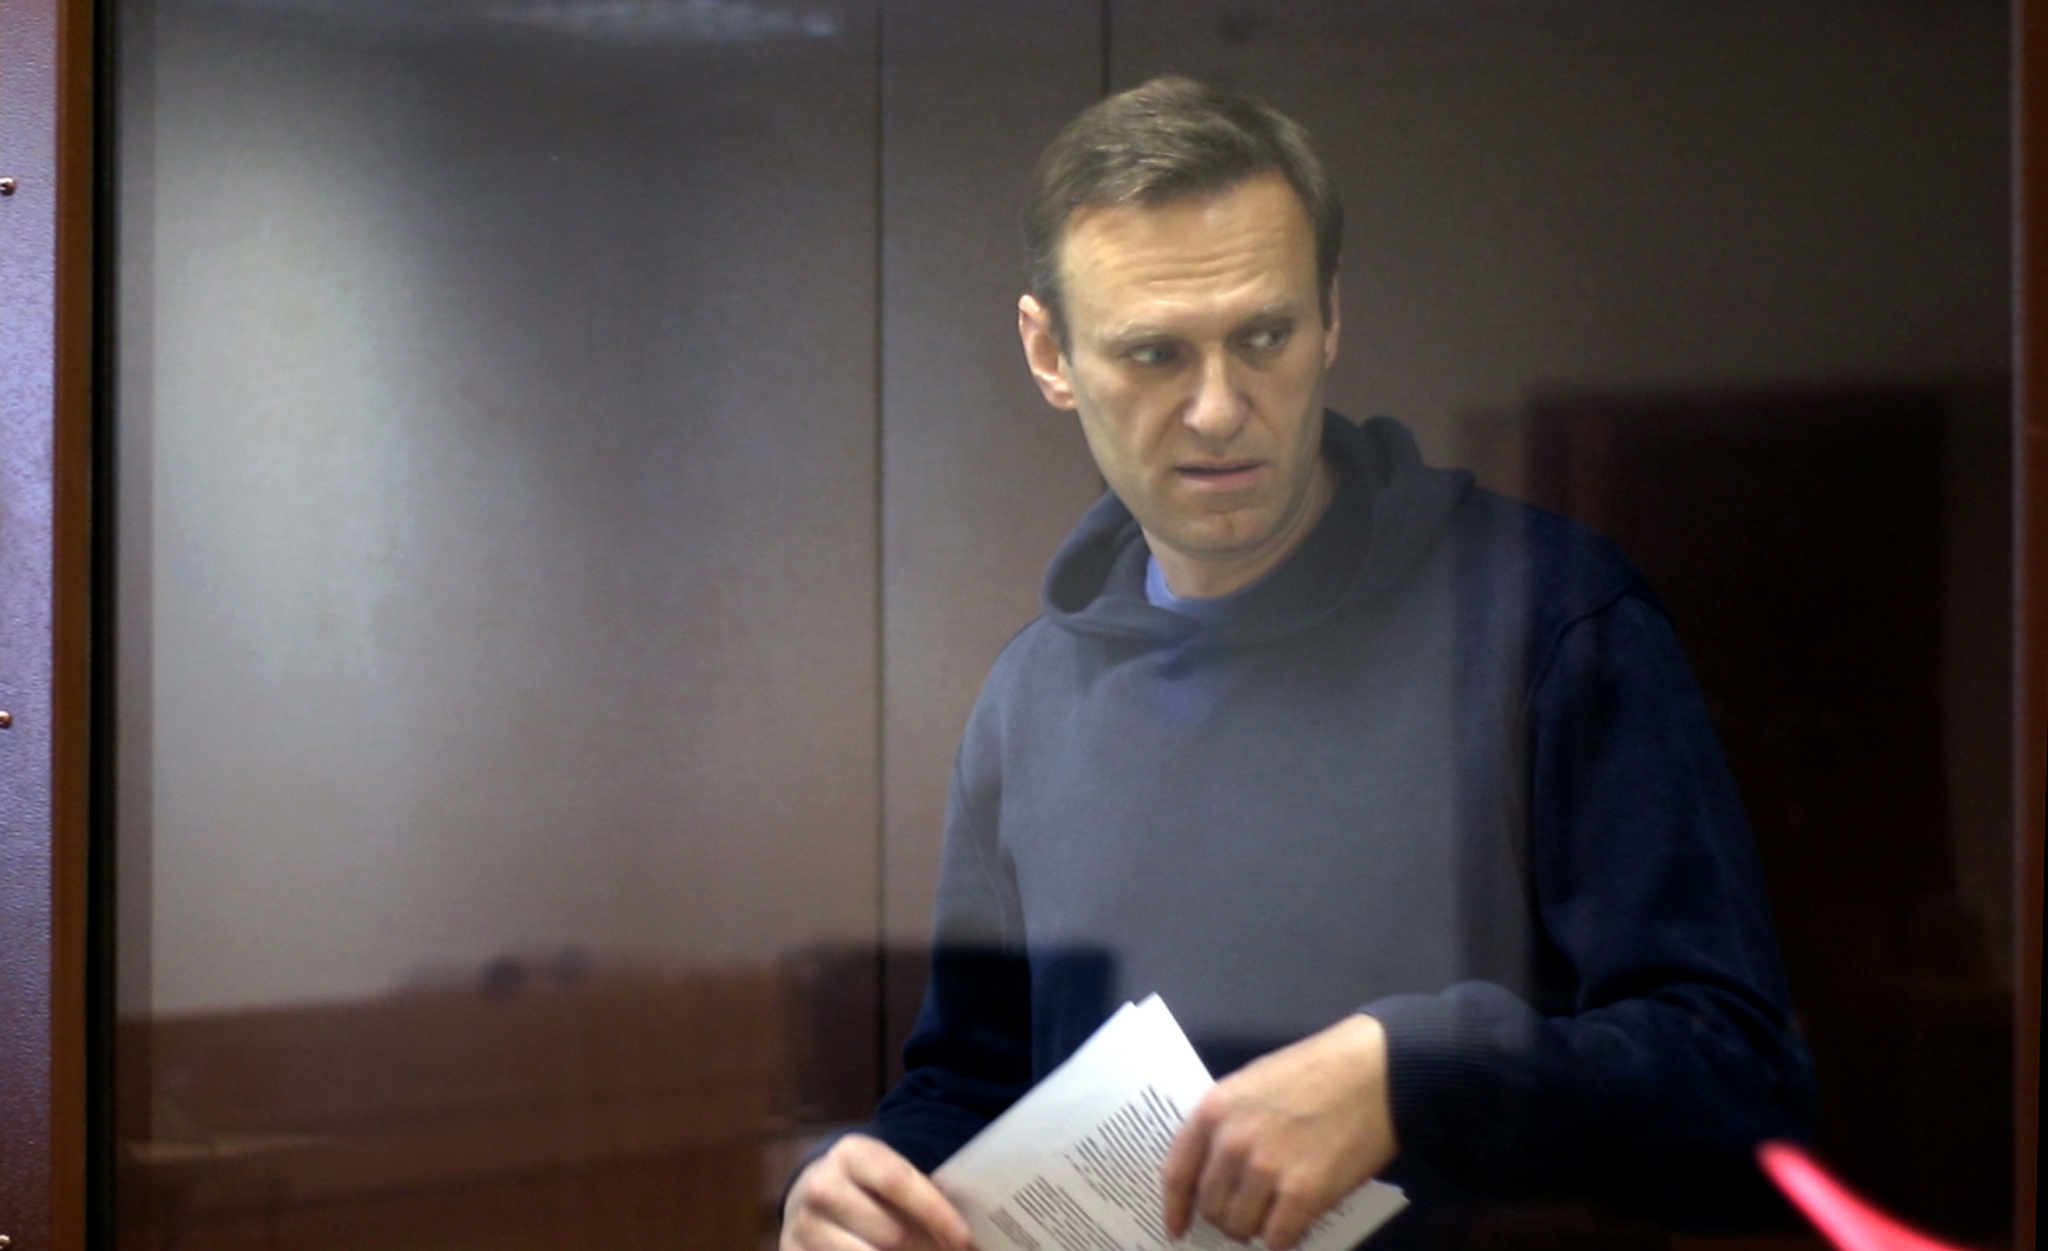 epa09015512 A still image taken from a handout video footage made available by the press service of the Babushkinsky district court shows Russian opposition leader Alexei Navalny inside a glass cage prior to a hearing of a case on slander charges in Moscow, Russia, 16 February 2021. In June 2020 the Russian Investigative Committee opened a criminal case against Alexei Navalny on charges of slander against WWII veteran Ignat Artemenko after Navalny's comment about a video promoting the amendments to the Russian Constitution.  EPA/BABUSHKINSKY DISTRICT COURT PRES -- MANDATORY CREDIT -- BEST QUALITY AVAILABLE -- HANDOUT EDITORIAL USE ONLY/NO SALES